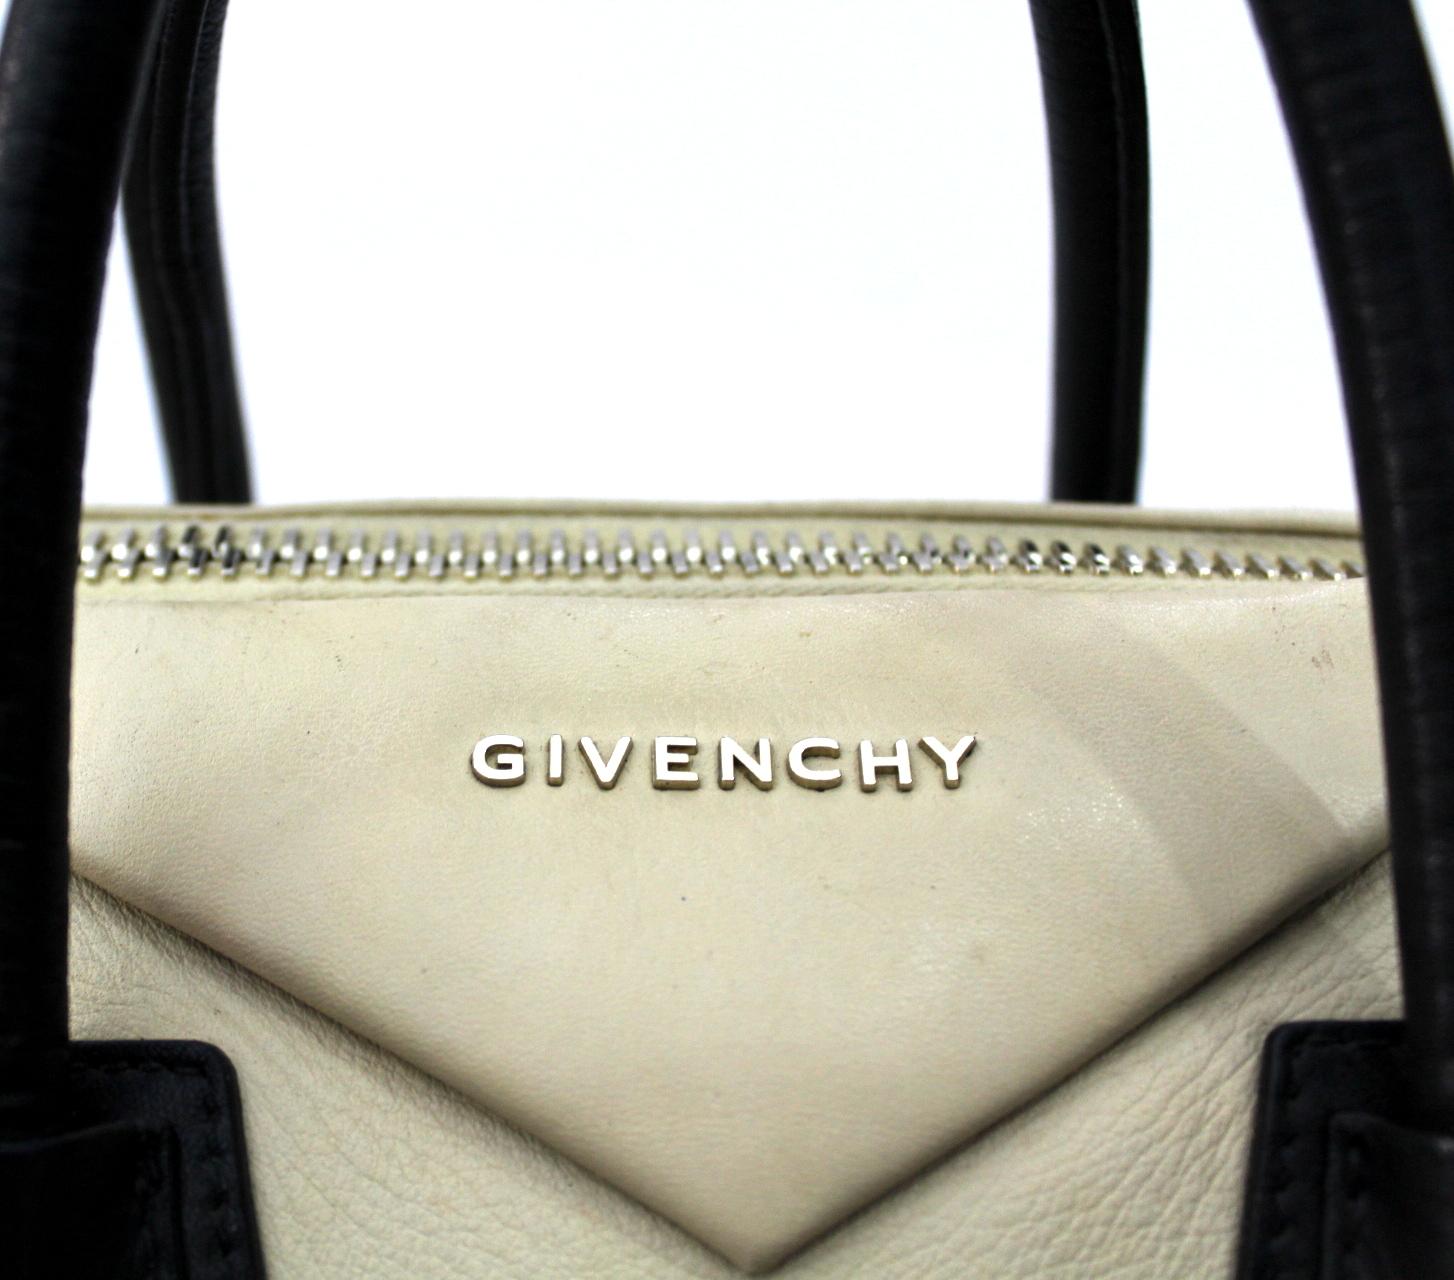 This Givenchy Medium Antigona folder, in beige with black finishes, has the characteristic logo in the shape of envelope and a structured form that is well known to Givenchy lovers all over the world. Two upper handles in stiff leather and a longer